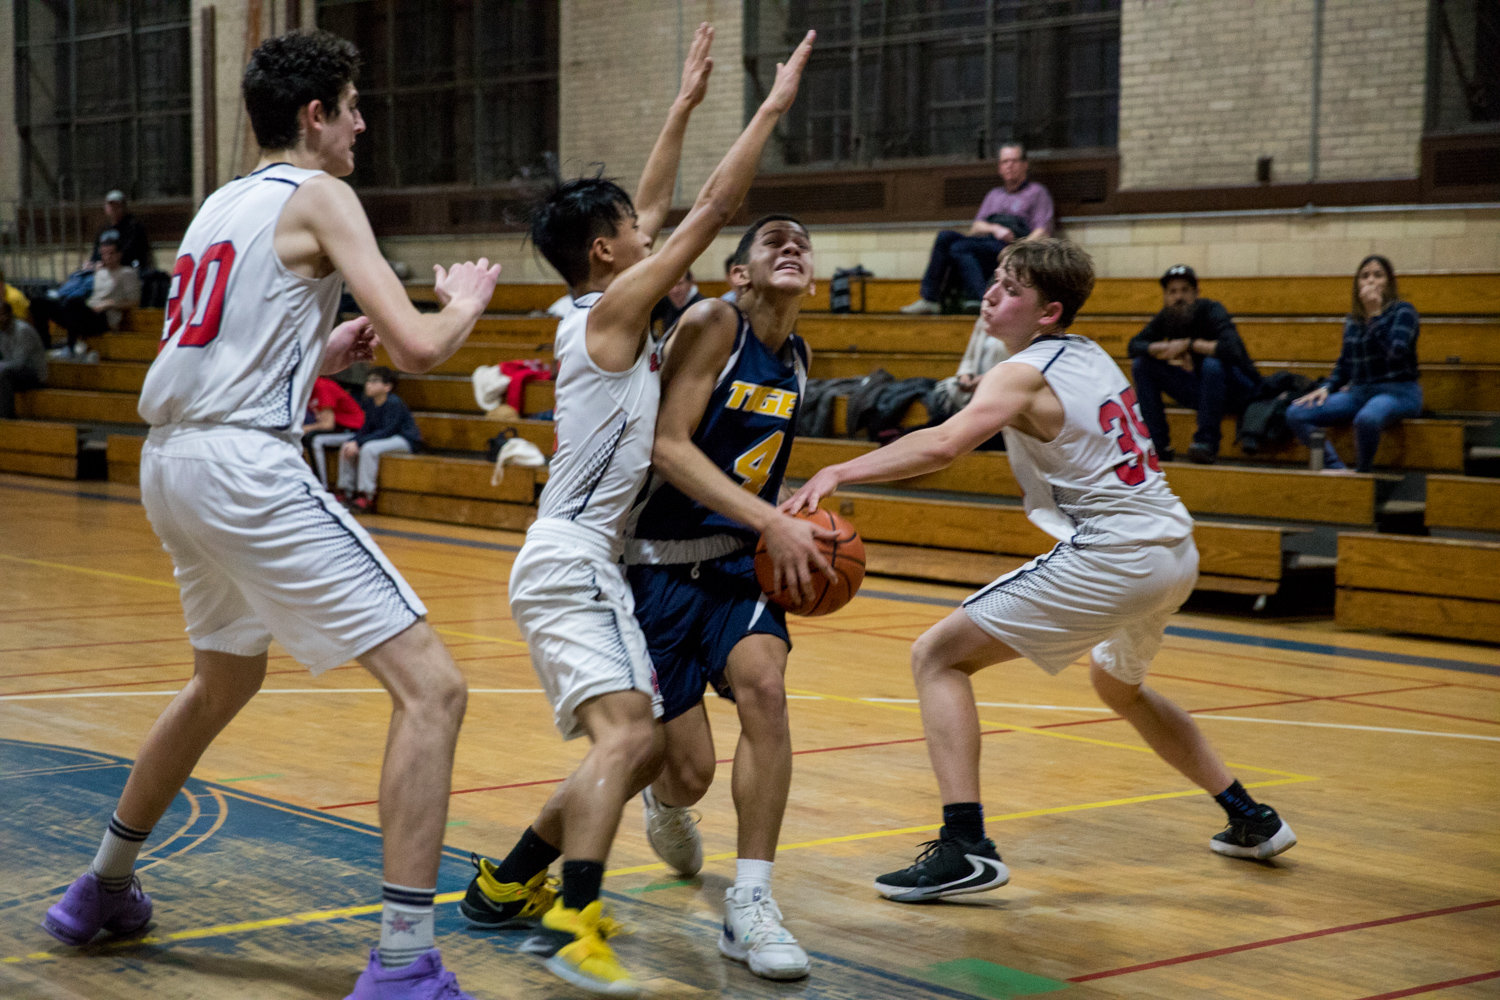 Riverdale/Kingsbridge Academy’s Ethan Bonet slices through a pair of American Studies’ defenders during the Tigers’ 49-38 win over the Senators. Bonet finished with 12 points and 16 rebounds.